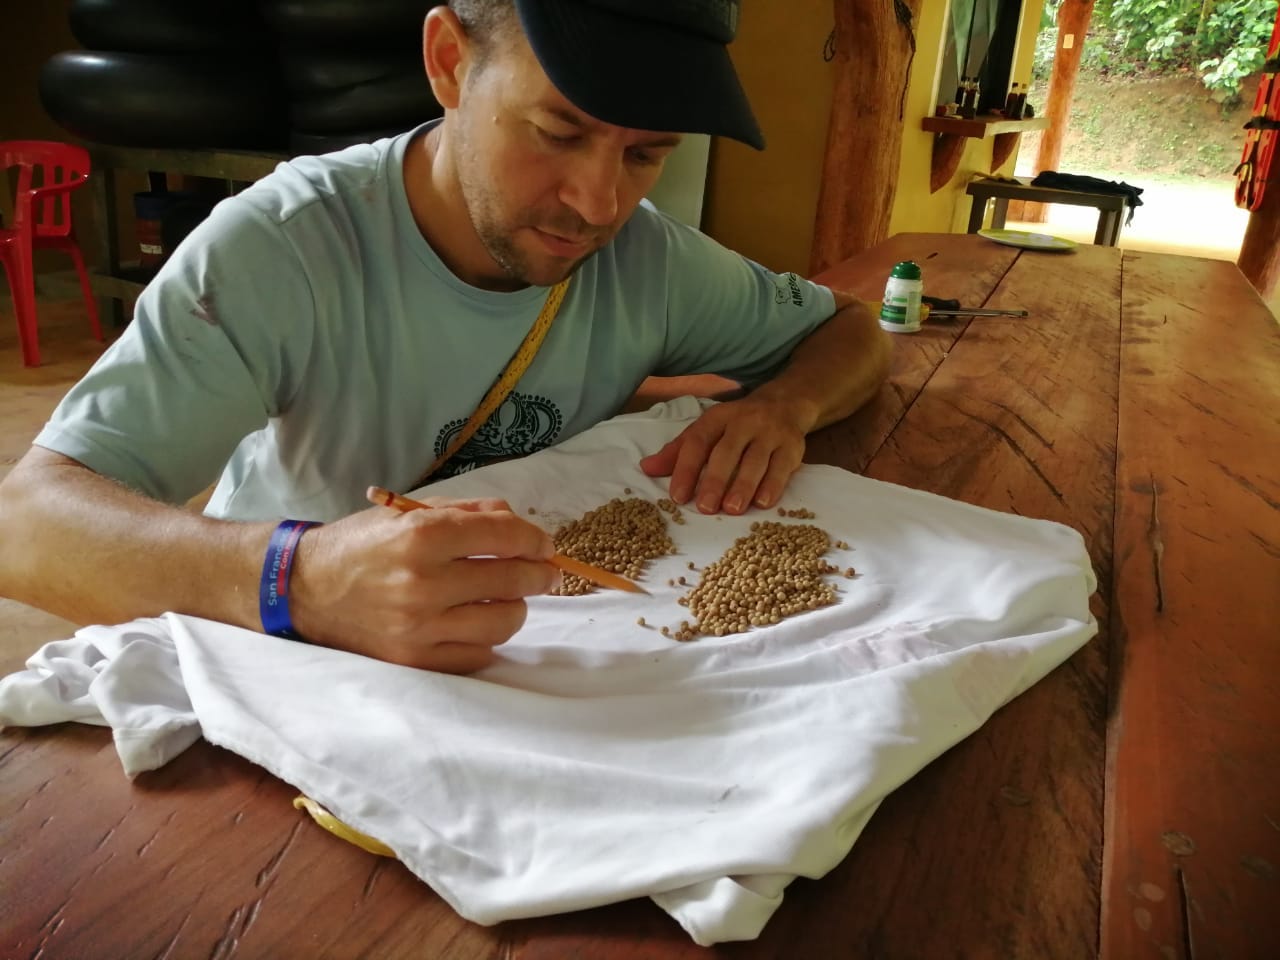 A man in a baseball cap holds a pencil and counts piles of beige seeds on a white cloth on a table.